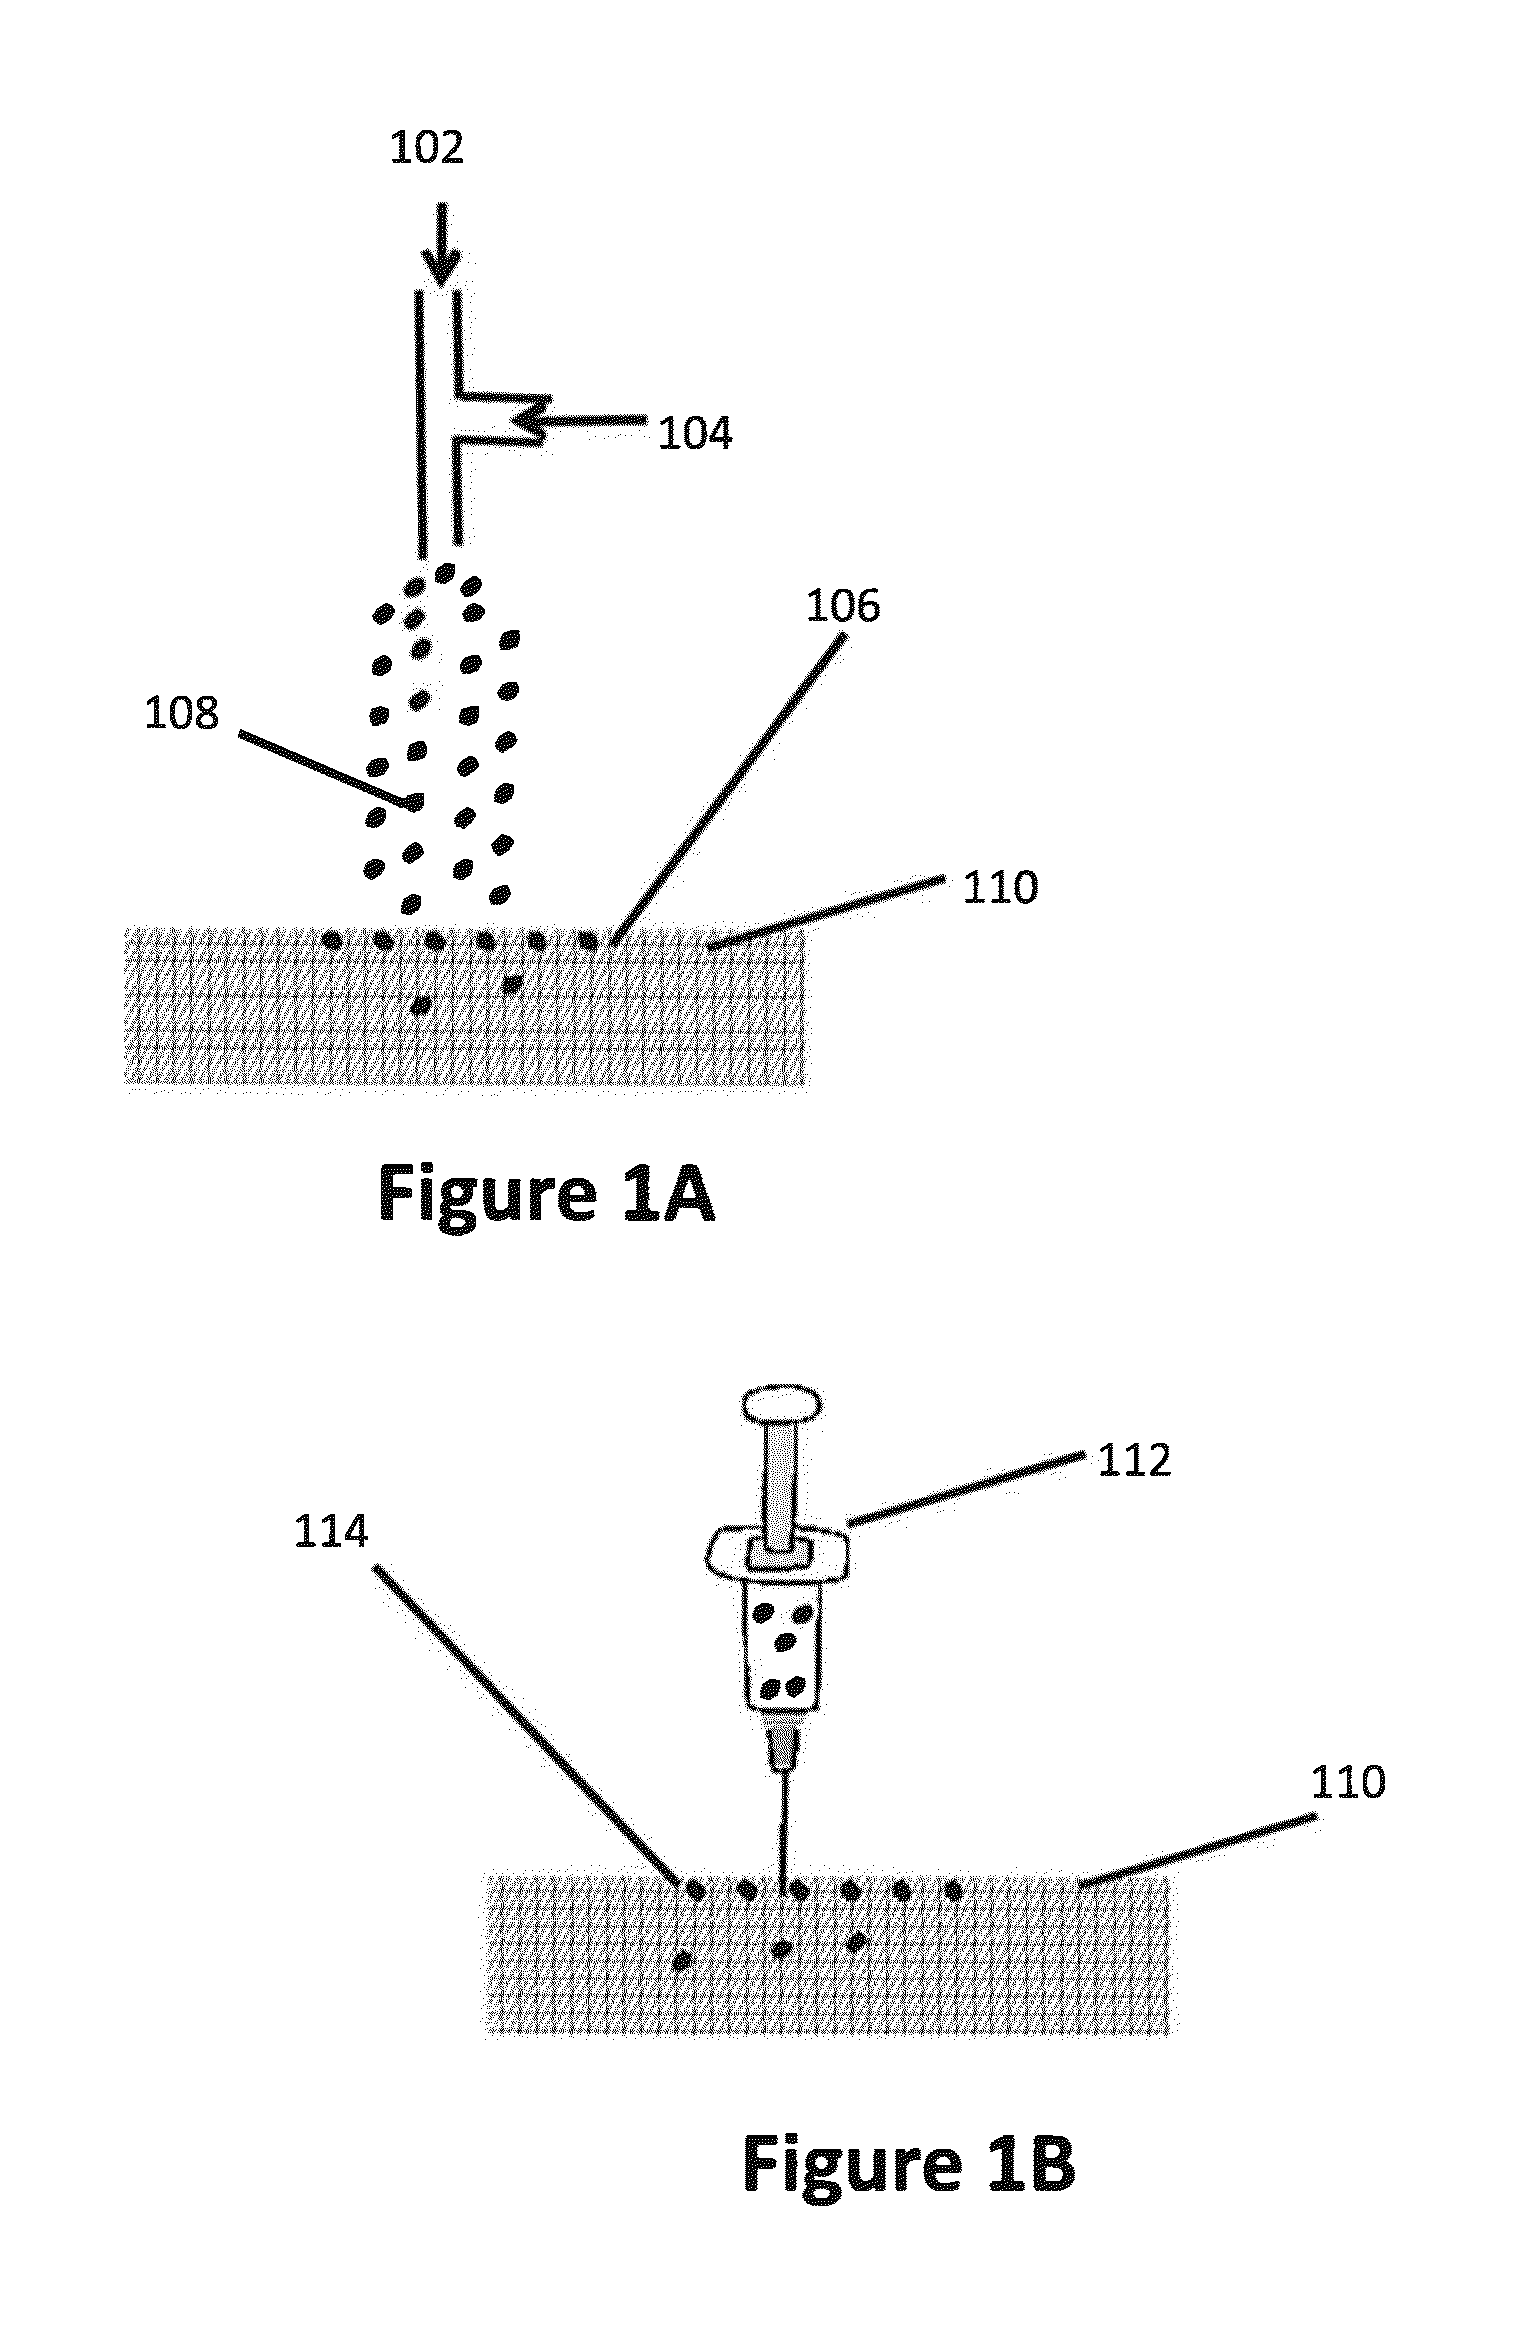 Compositions, methods and devices for local drug delivery